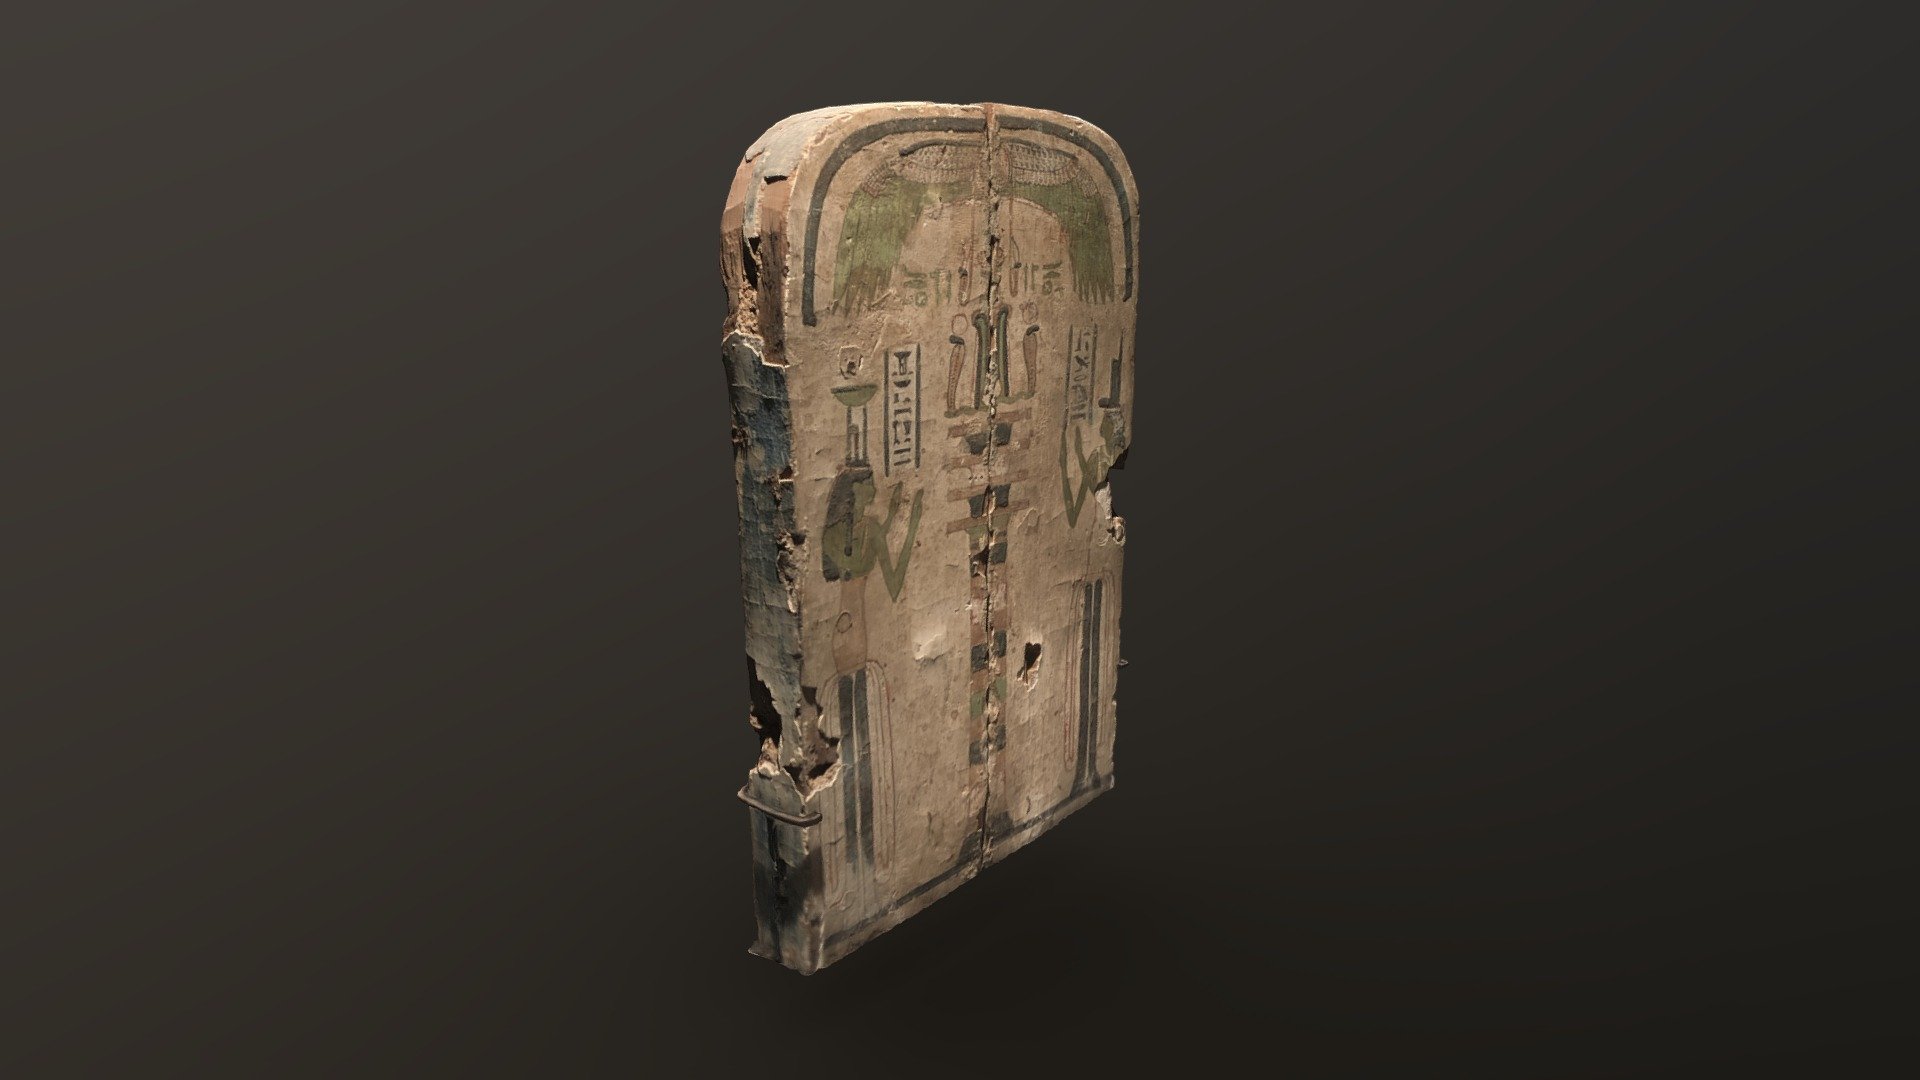 !!Photogrammetry Scan For Sale!!
Created in RealityCapture by Capturing Reality from 153 images in 00h:18m:46s. austinbeaulier.com - Egyptian Tablet 01 (photogrammetry) - Buy Royalty Free 3D model by Austin Beaulier (@Austin.Beaulier) 3d model